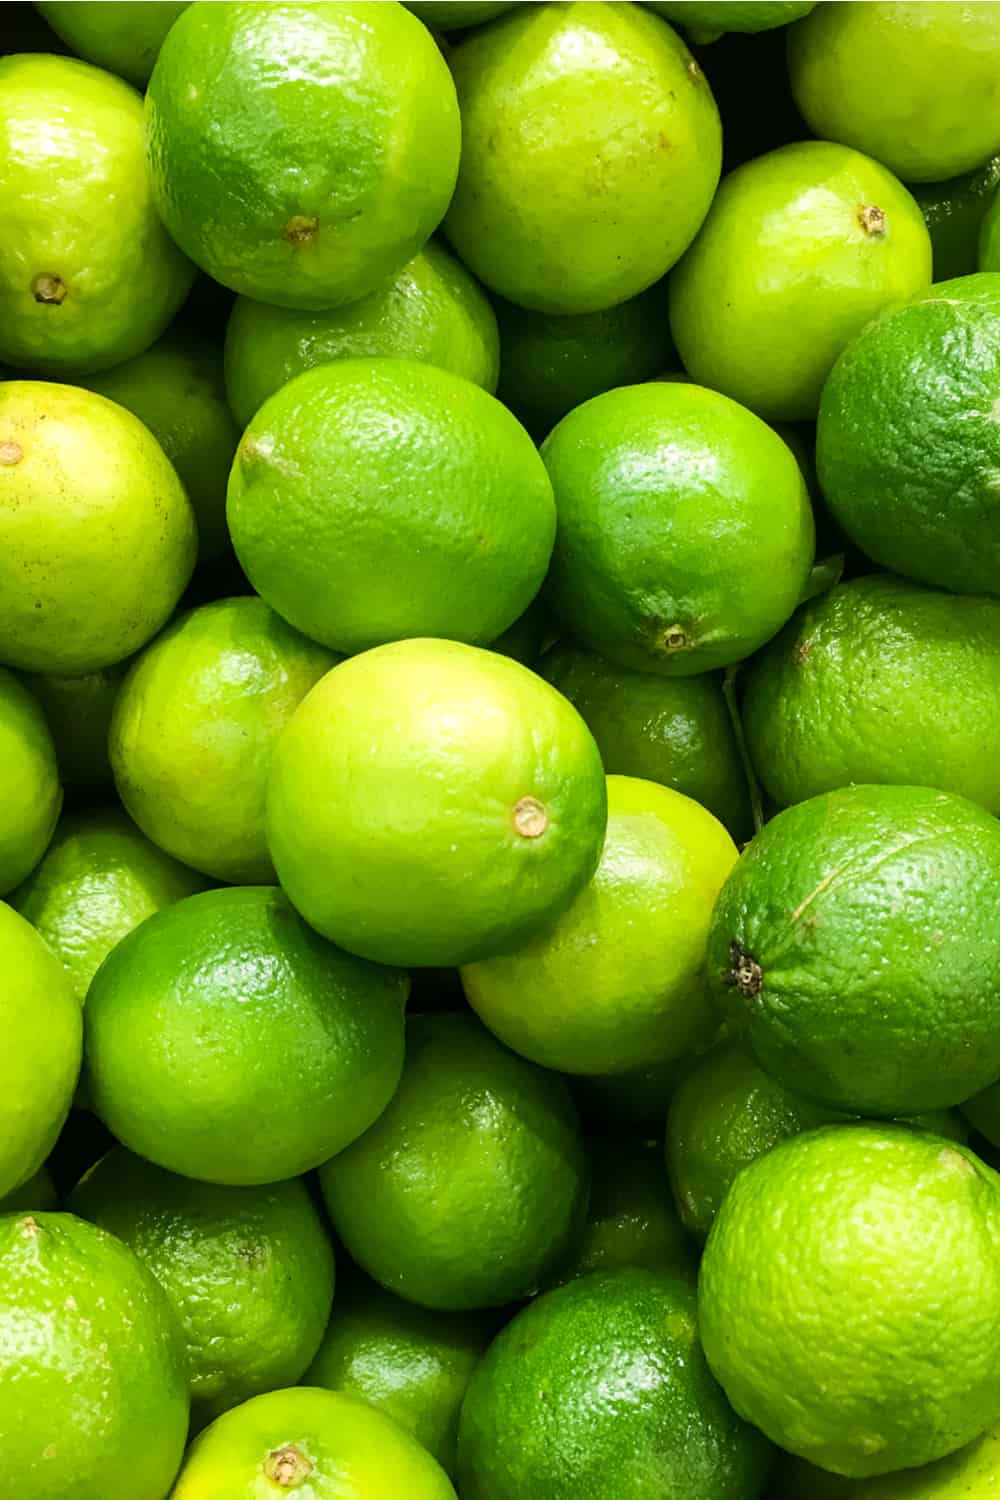 How to Tell if Limes have Gone Bad